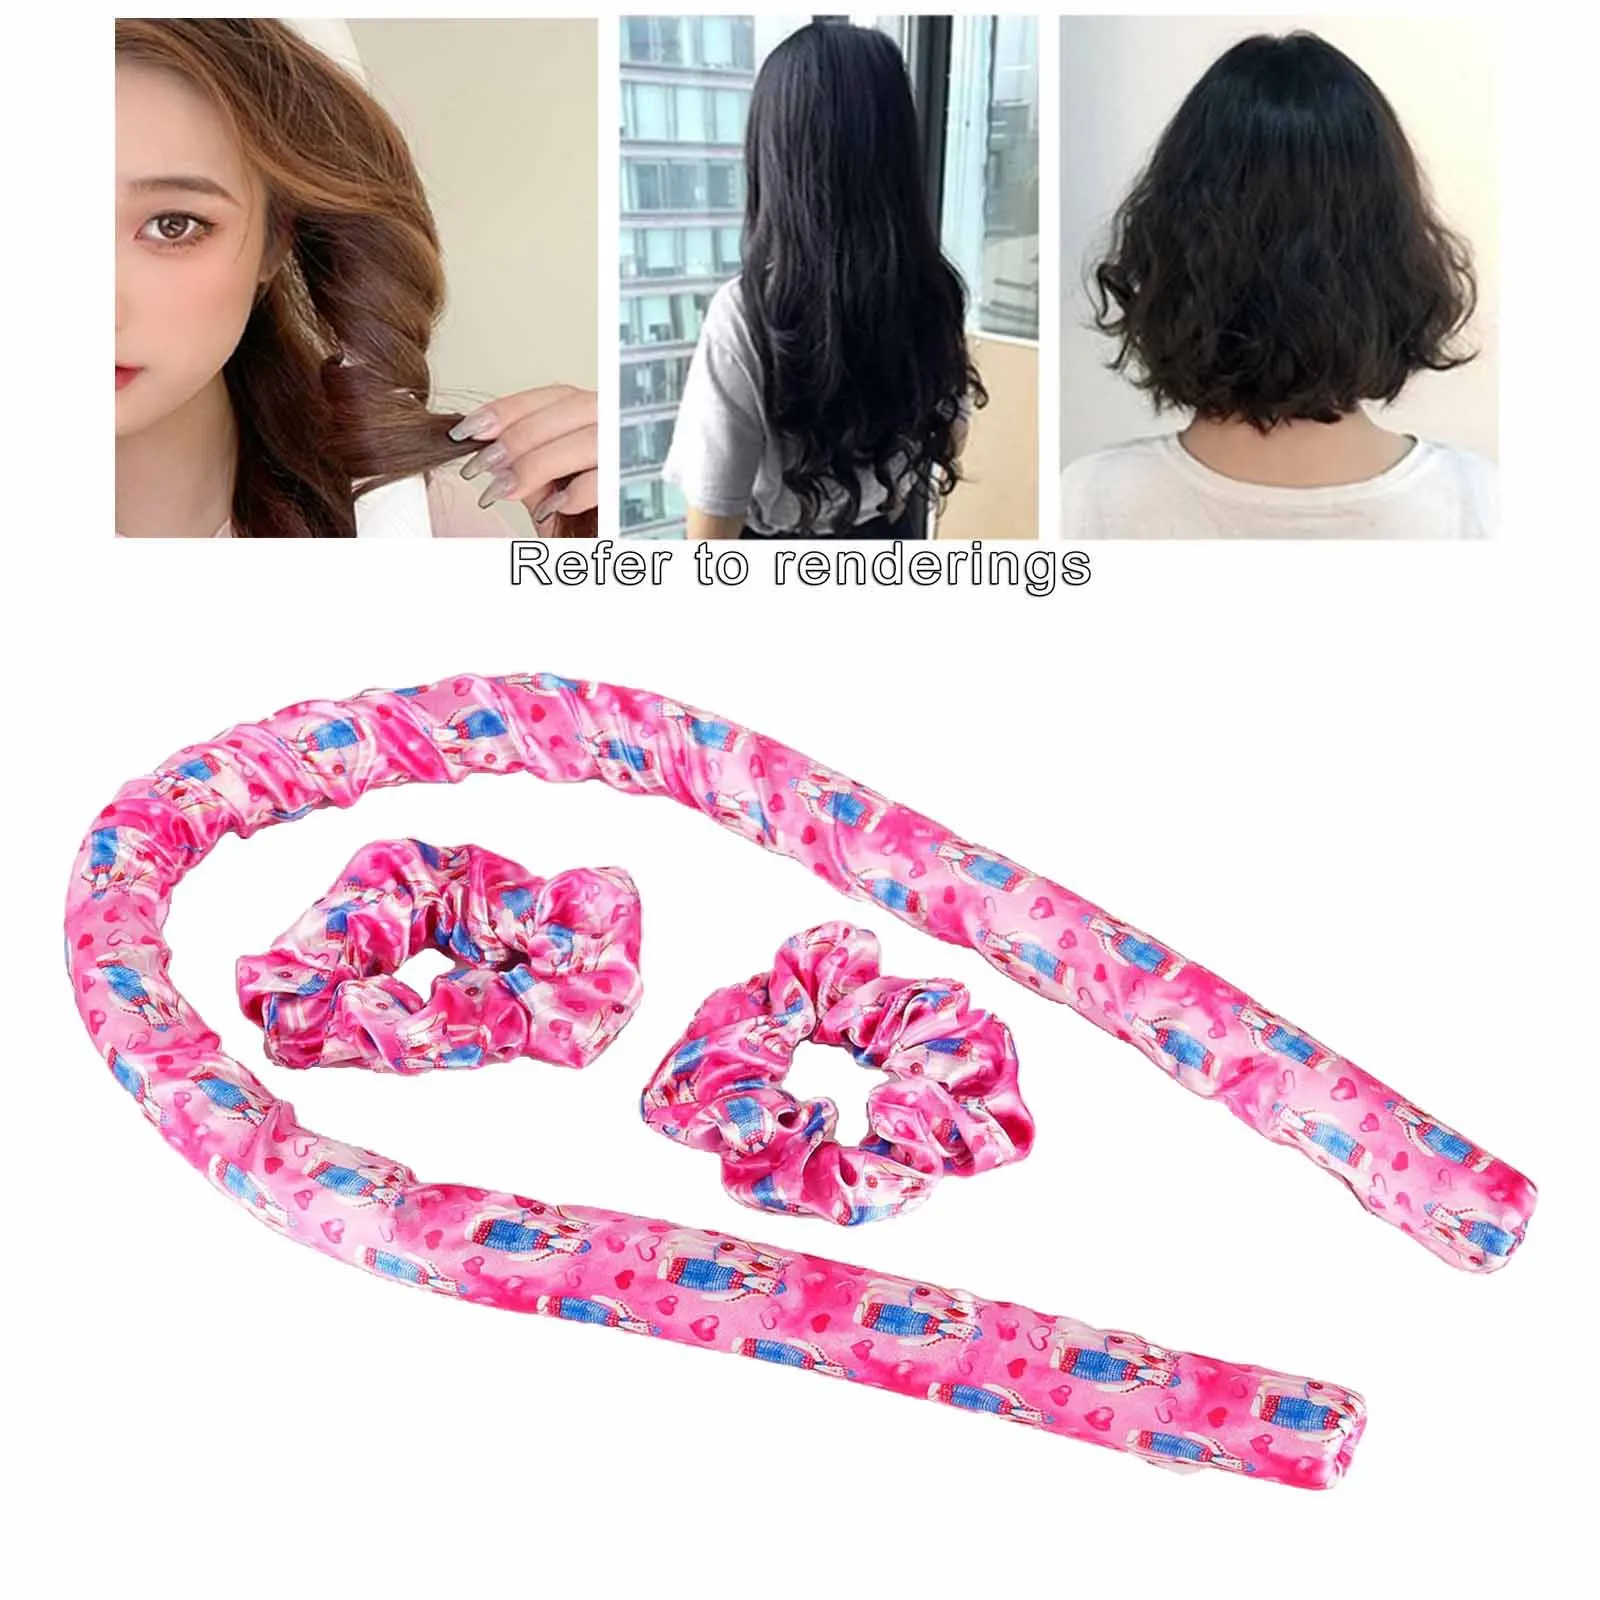 Curling Rod DIY Hair Styling Tools with Clip Sleeping Soft Foam Heatless Hair Rollers for Women Girls